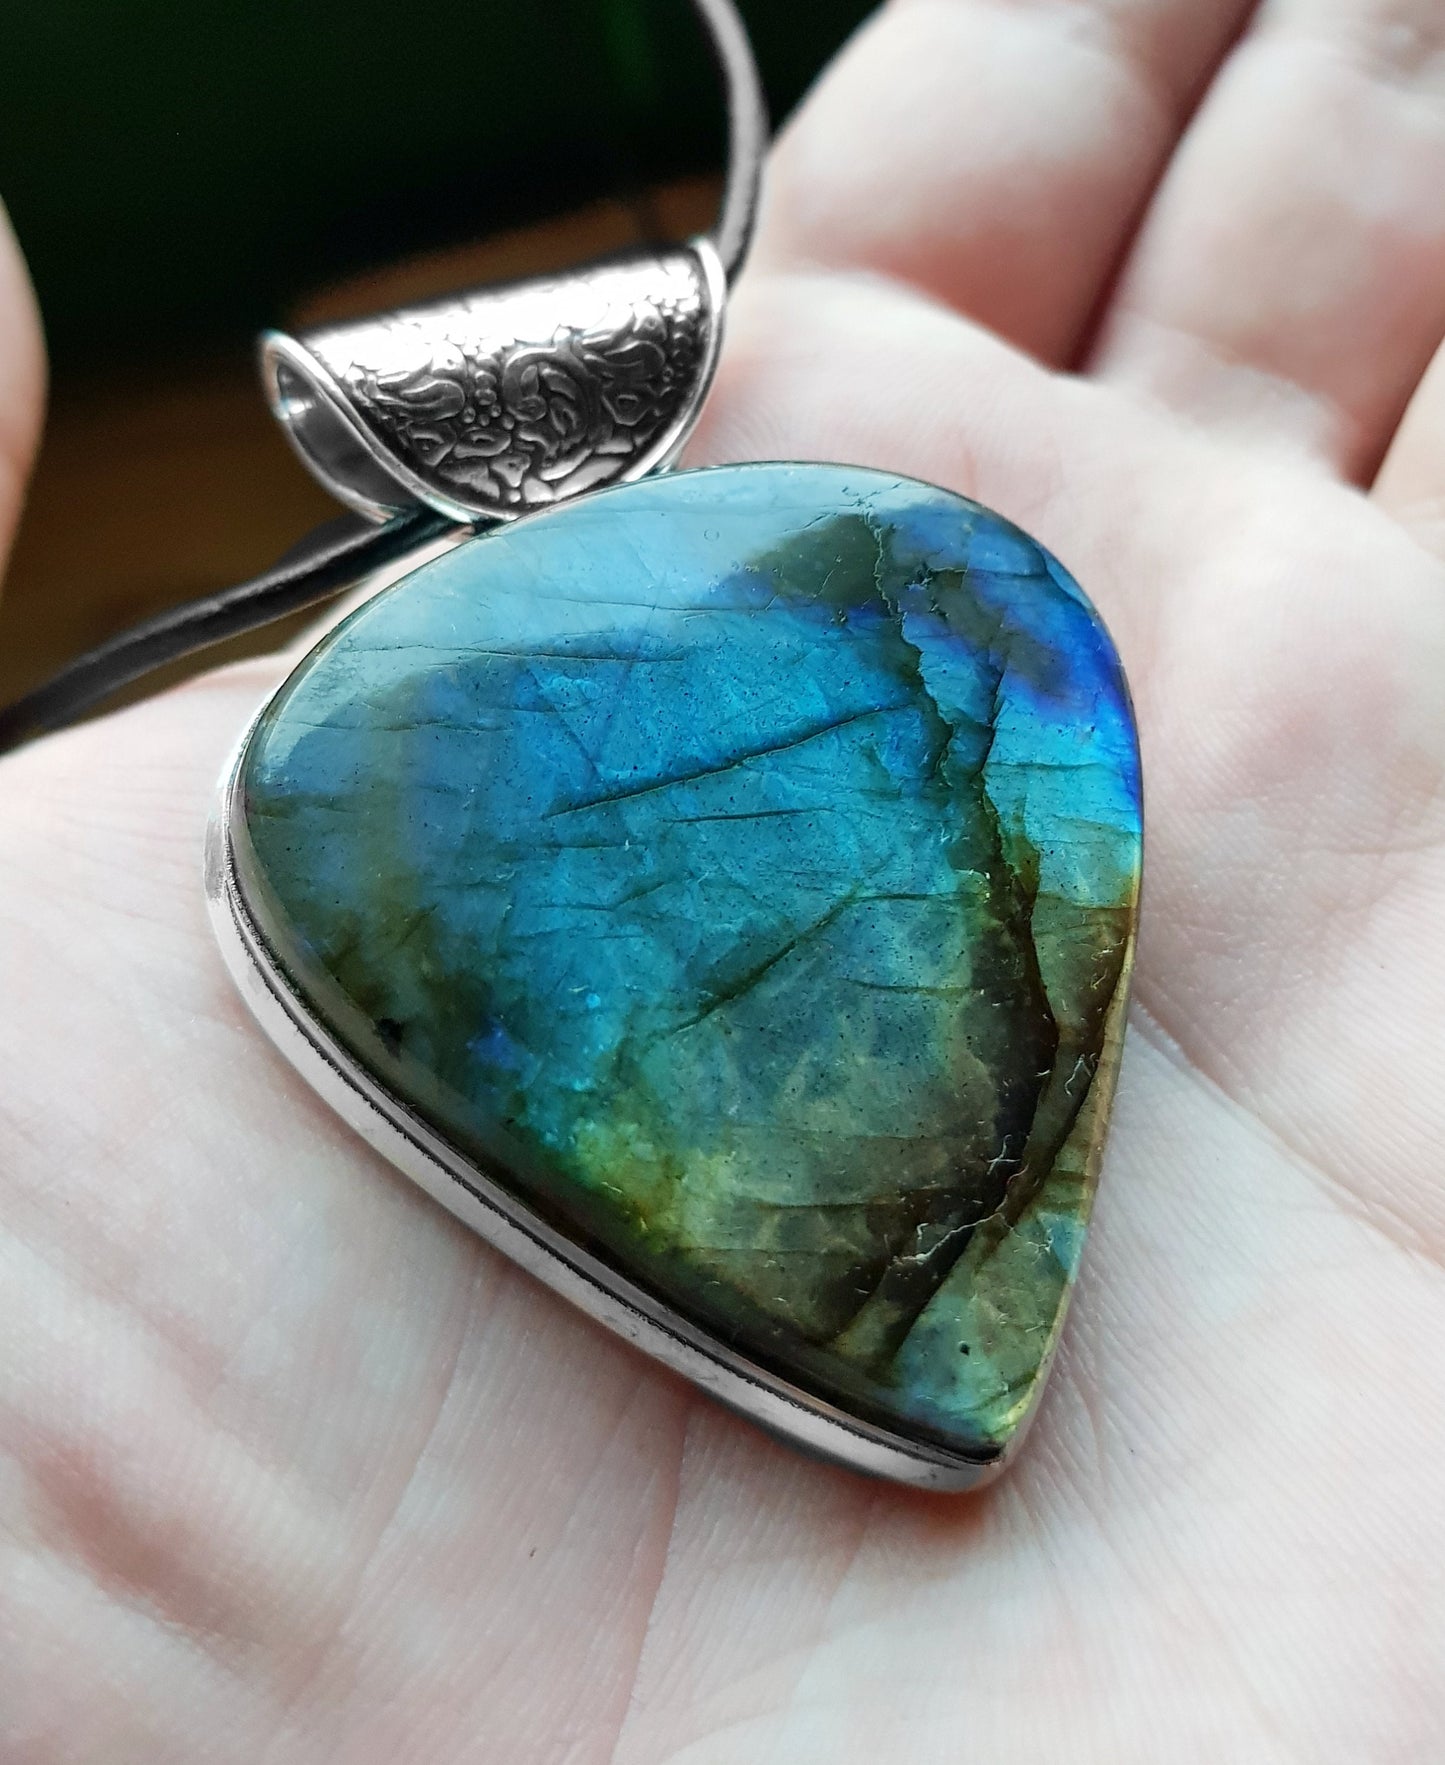 Top Grade Labradorite Pendant In Sterling Silver Statement Pendant Boho Jewellery Unique Gift One Of A Kind Jewellery